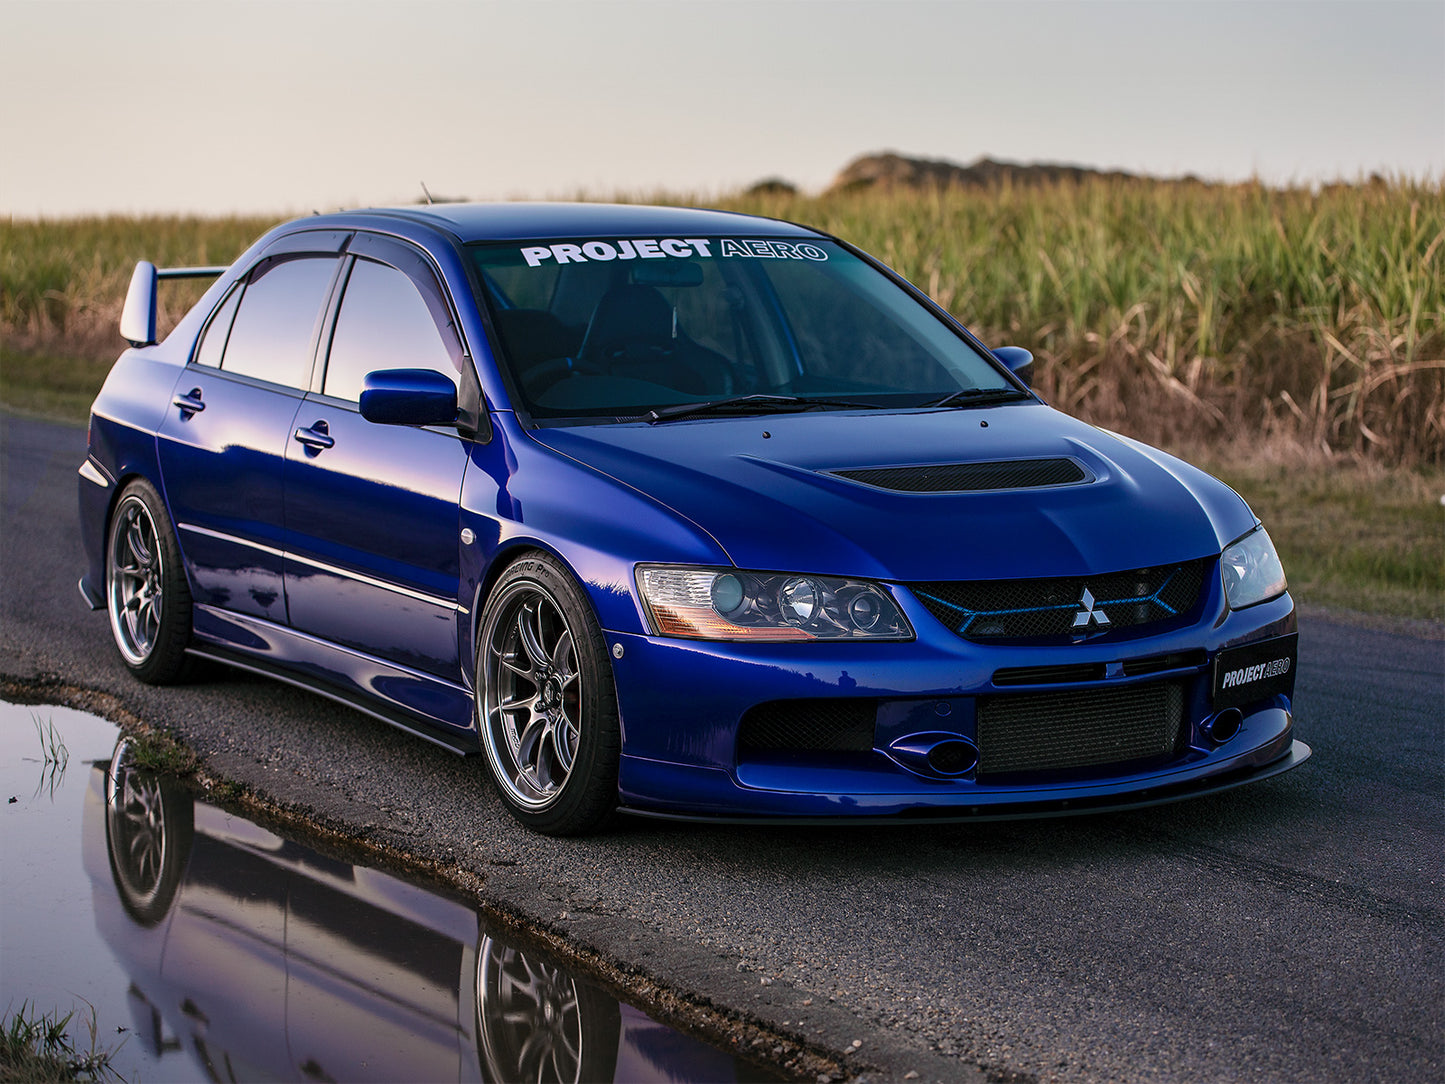 Project Aeros Evo 9 complete splitter lip kit is a perfect way to spice up your Evo 9, complimenting the OEM factory body kit